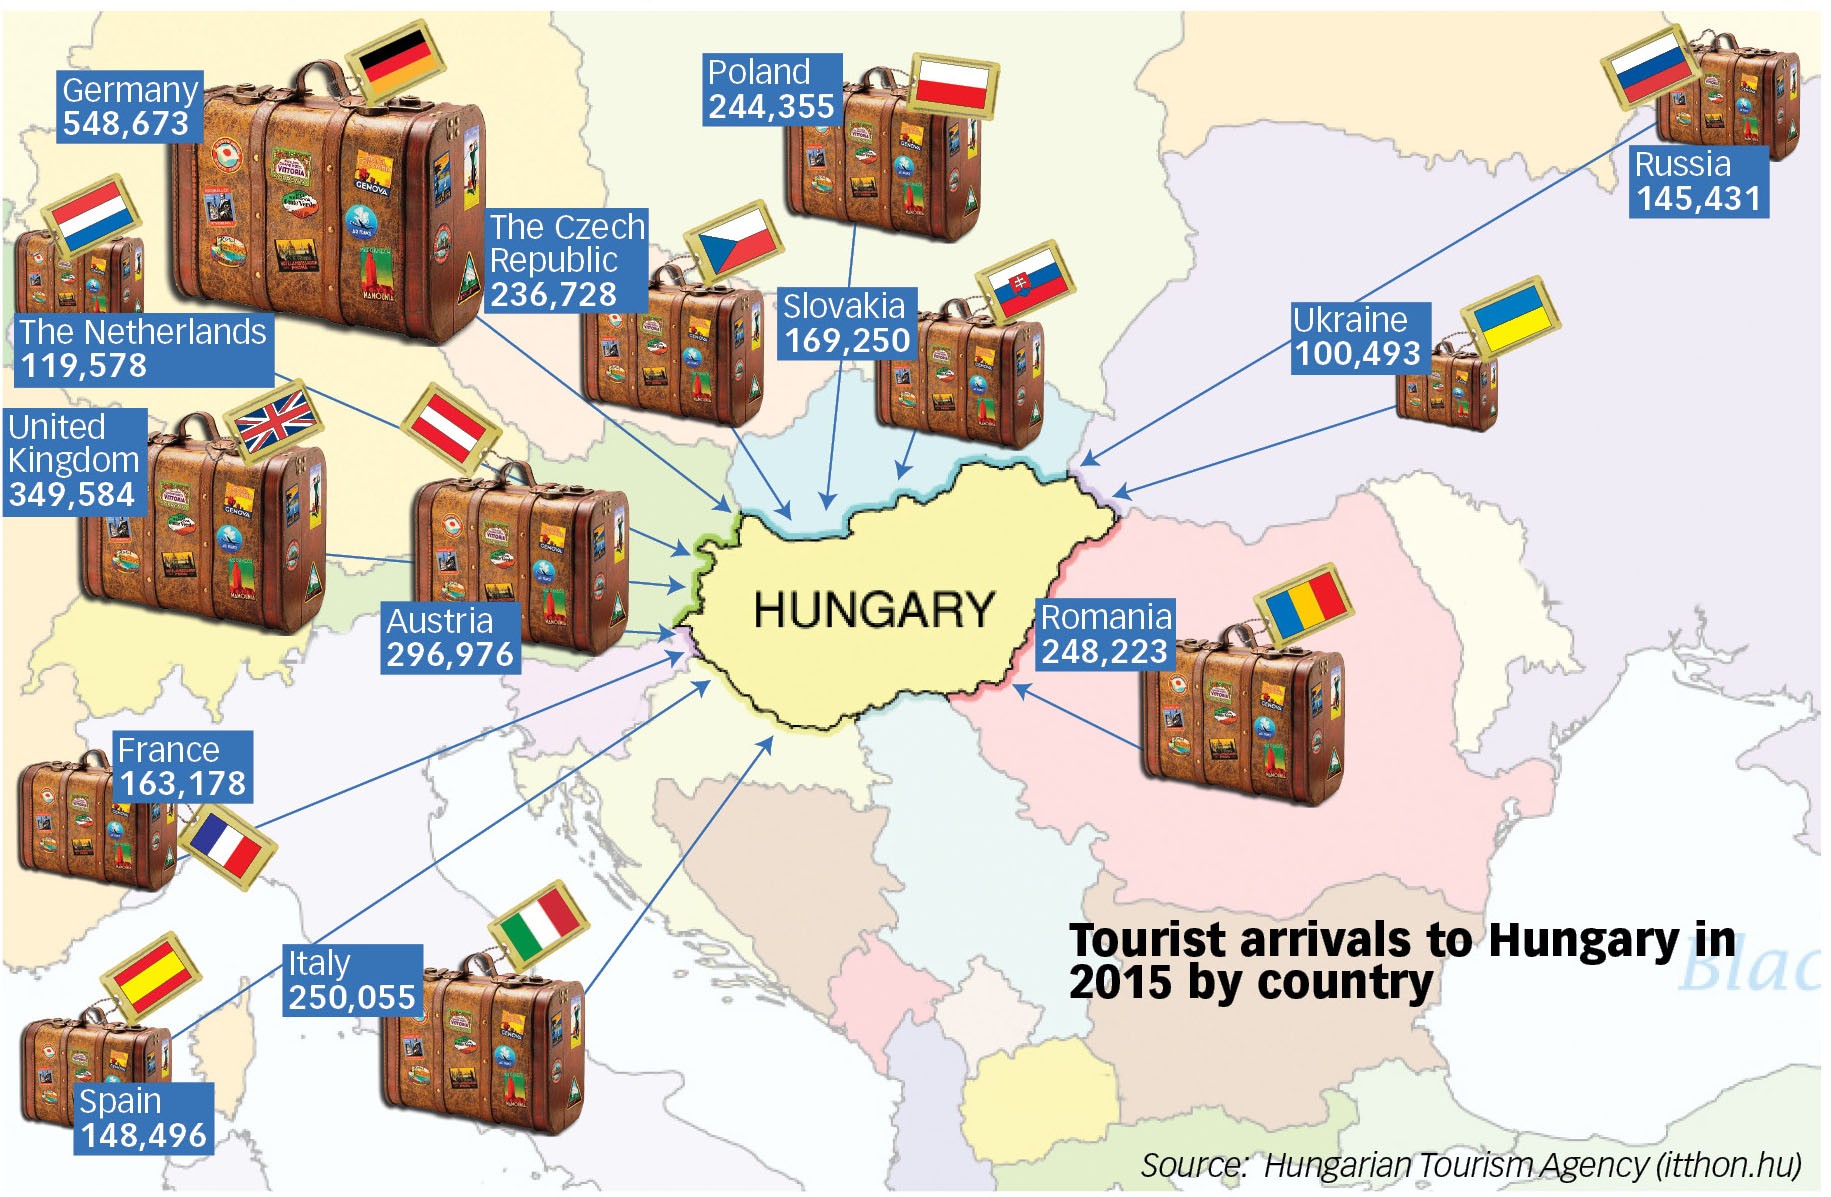 Tourist arrivals to Hungary in 2015 by country